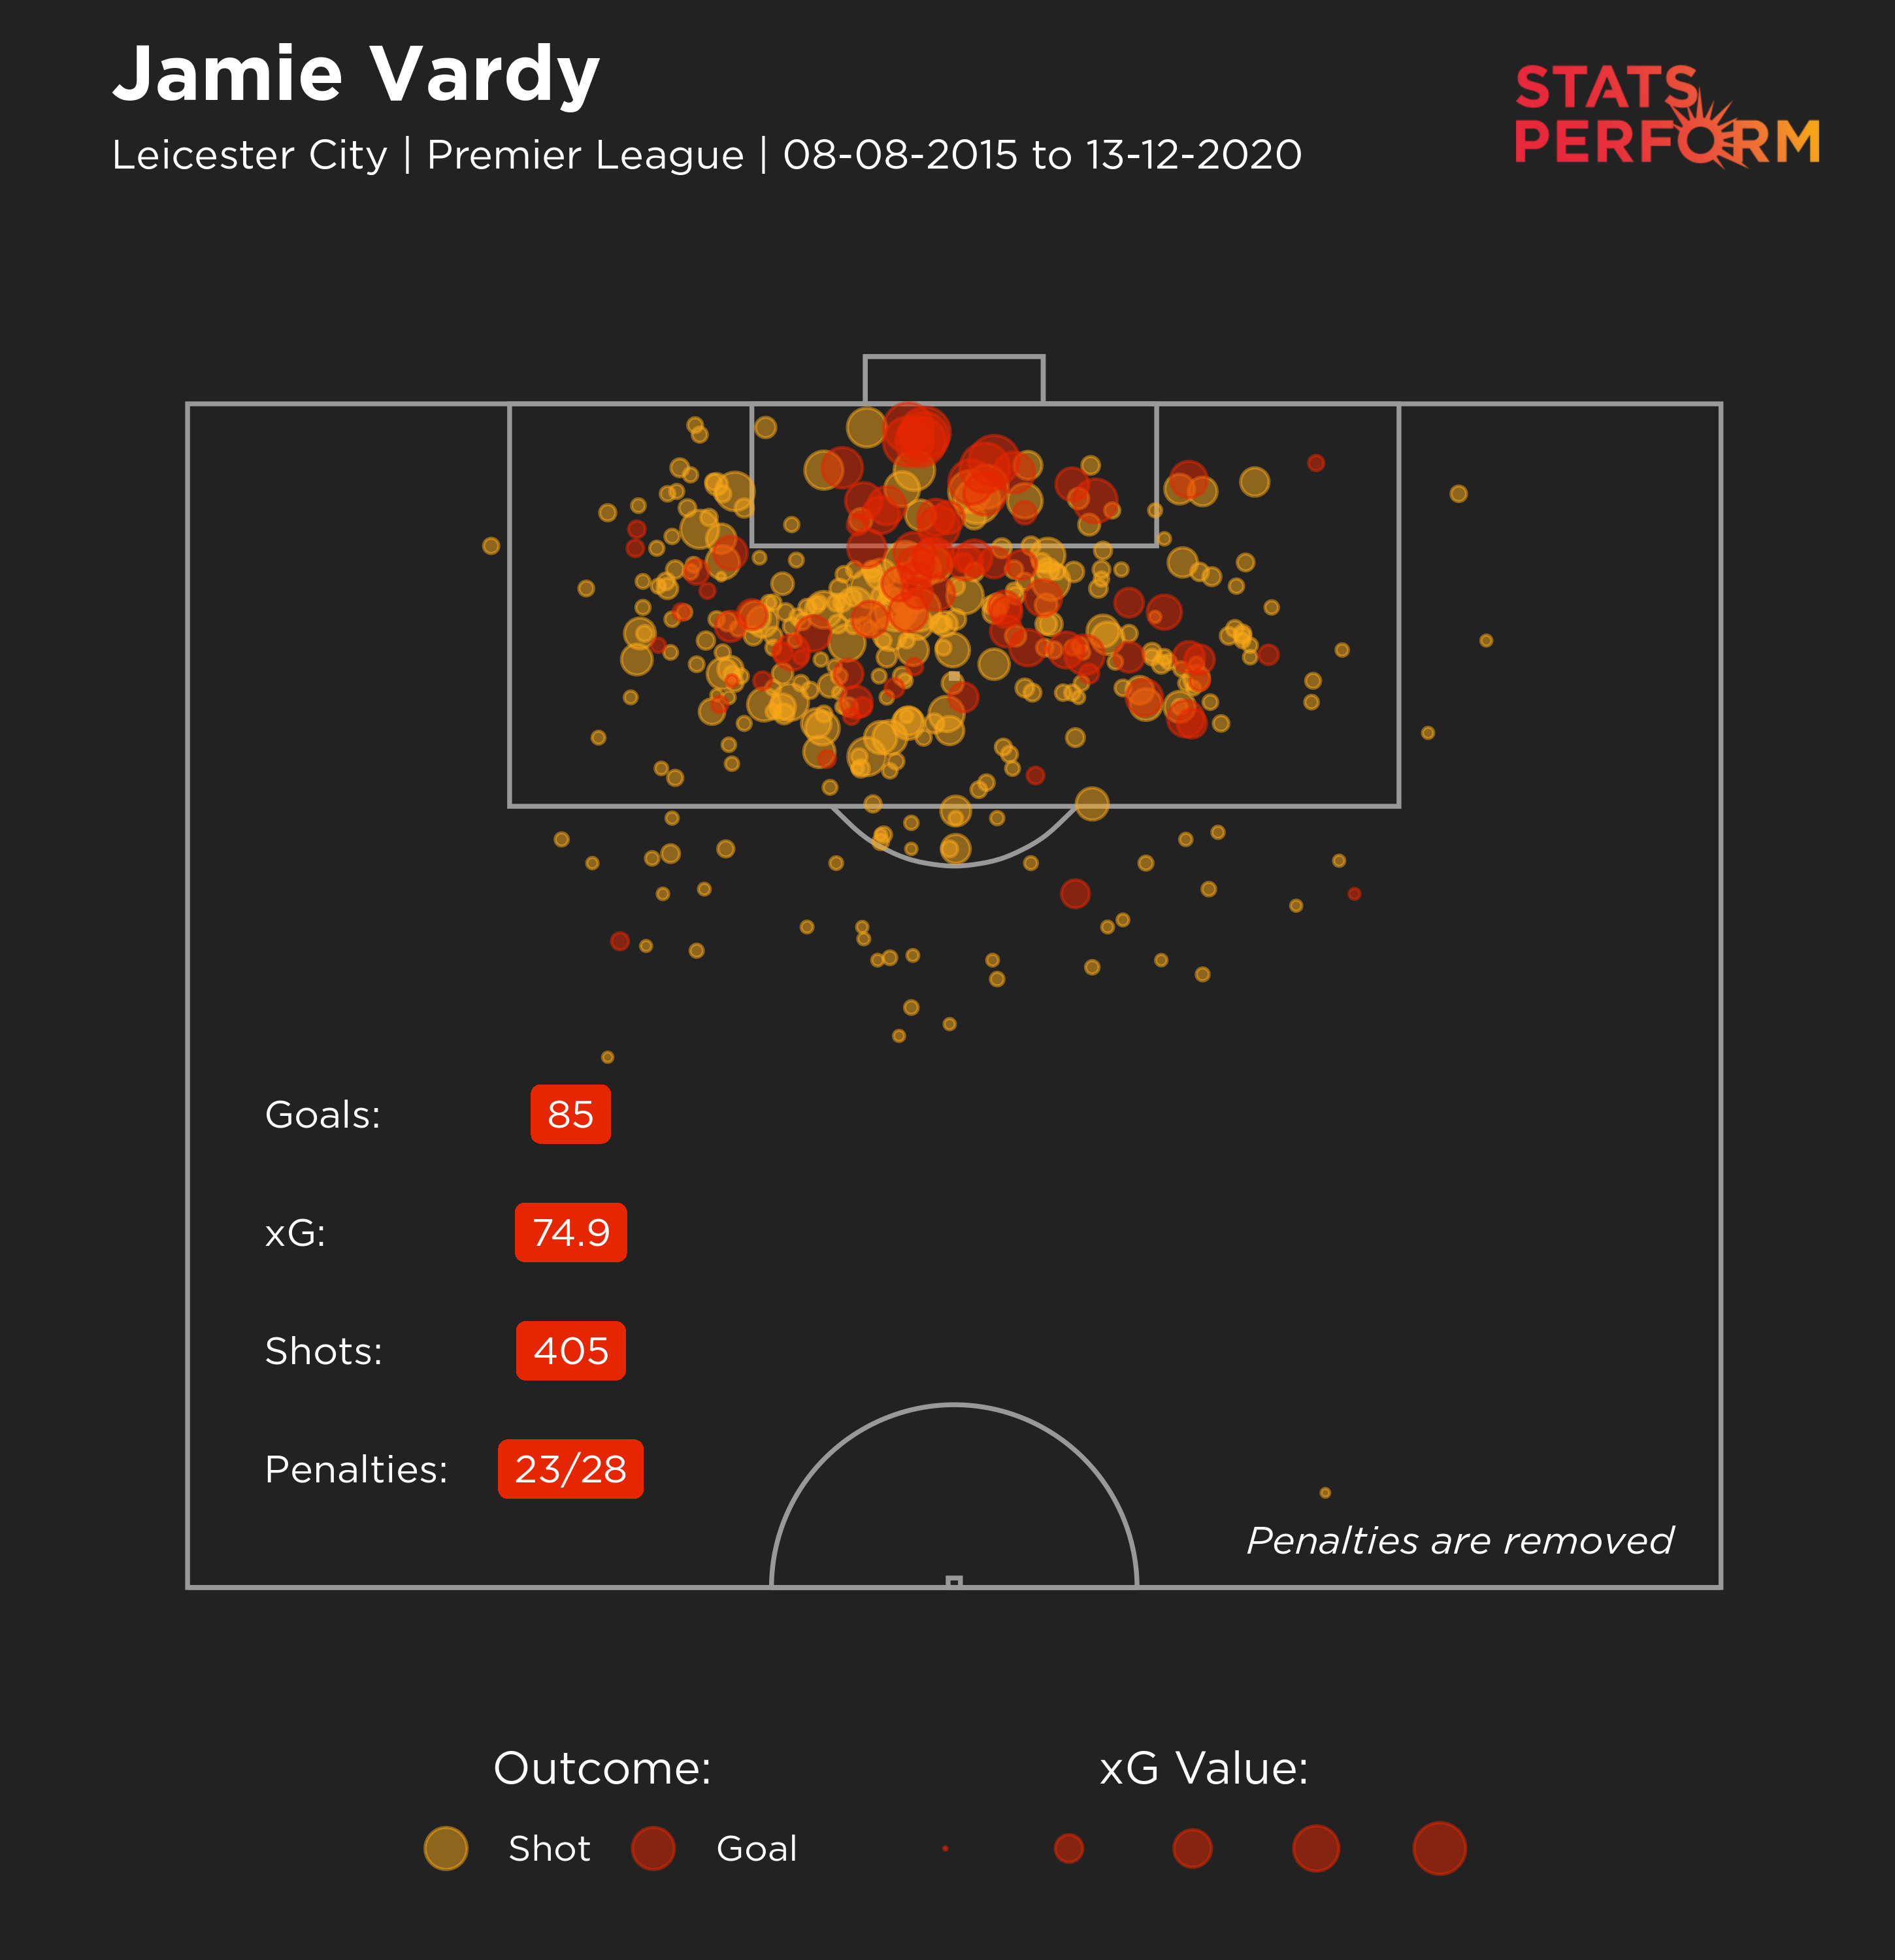 Jamie Vardy's expected goals map since the start of 2015-16